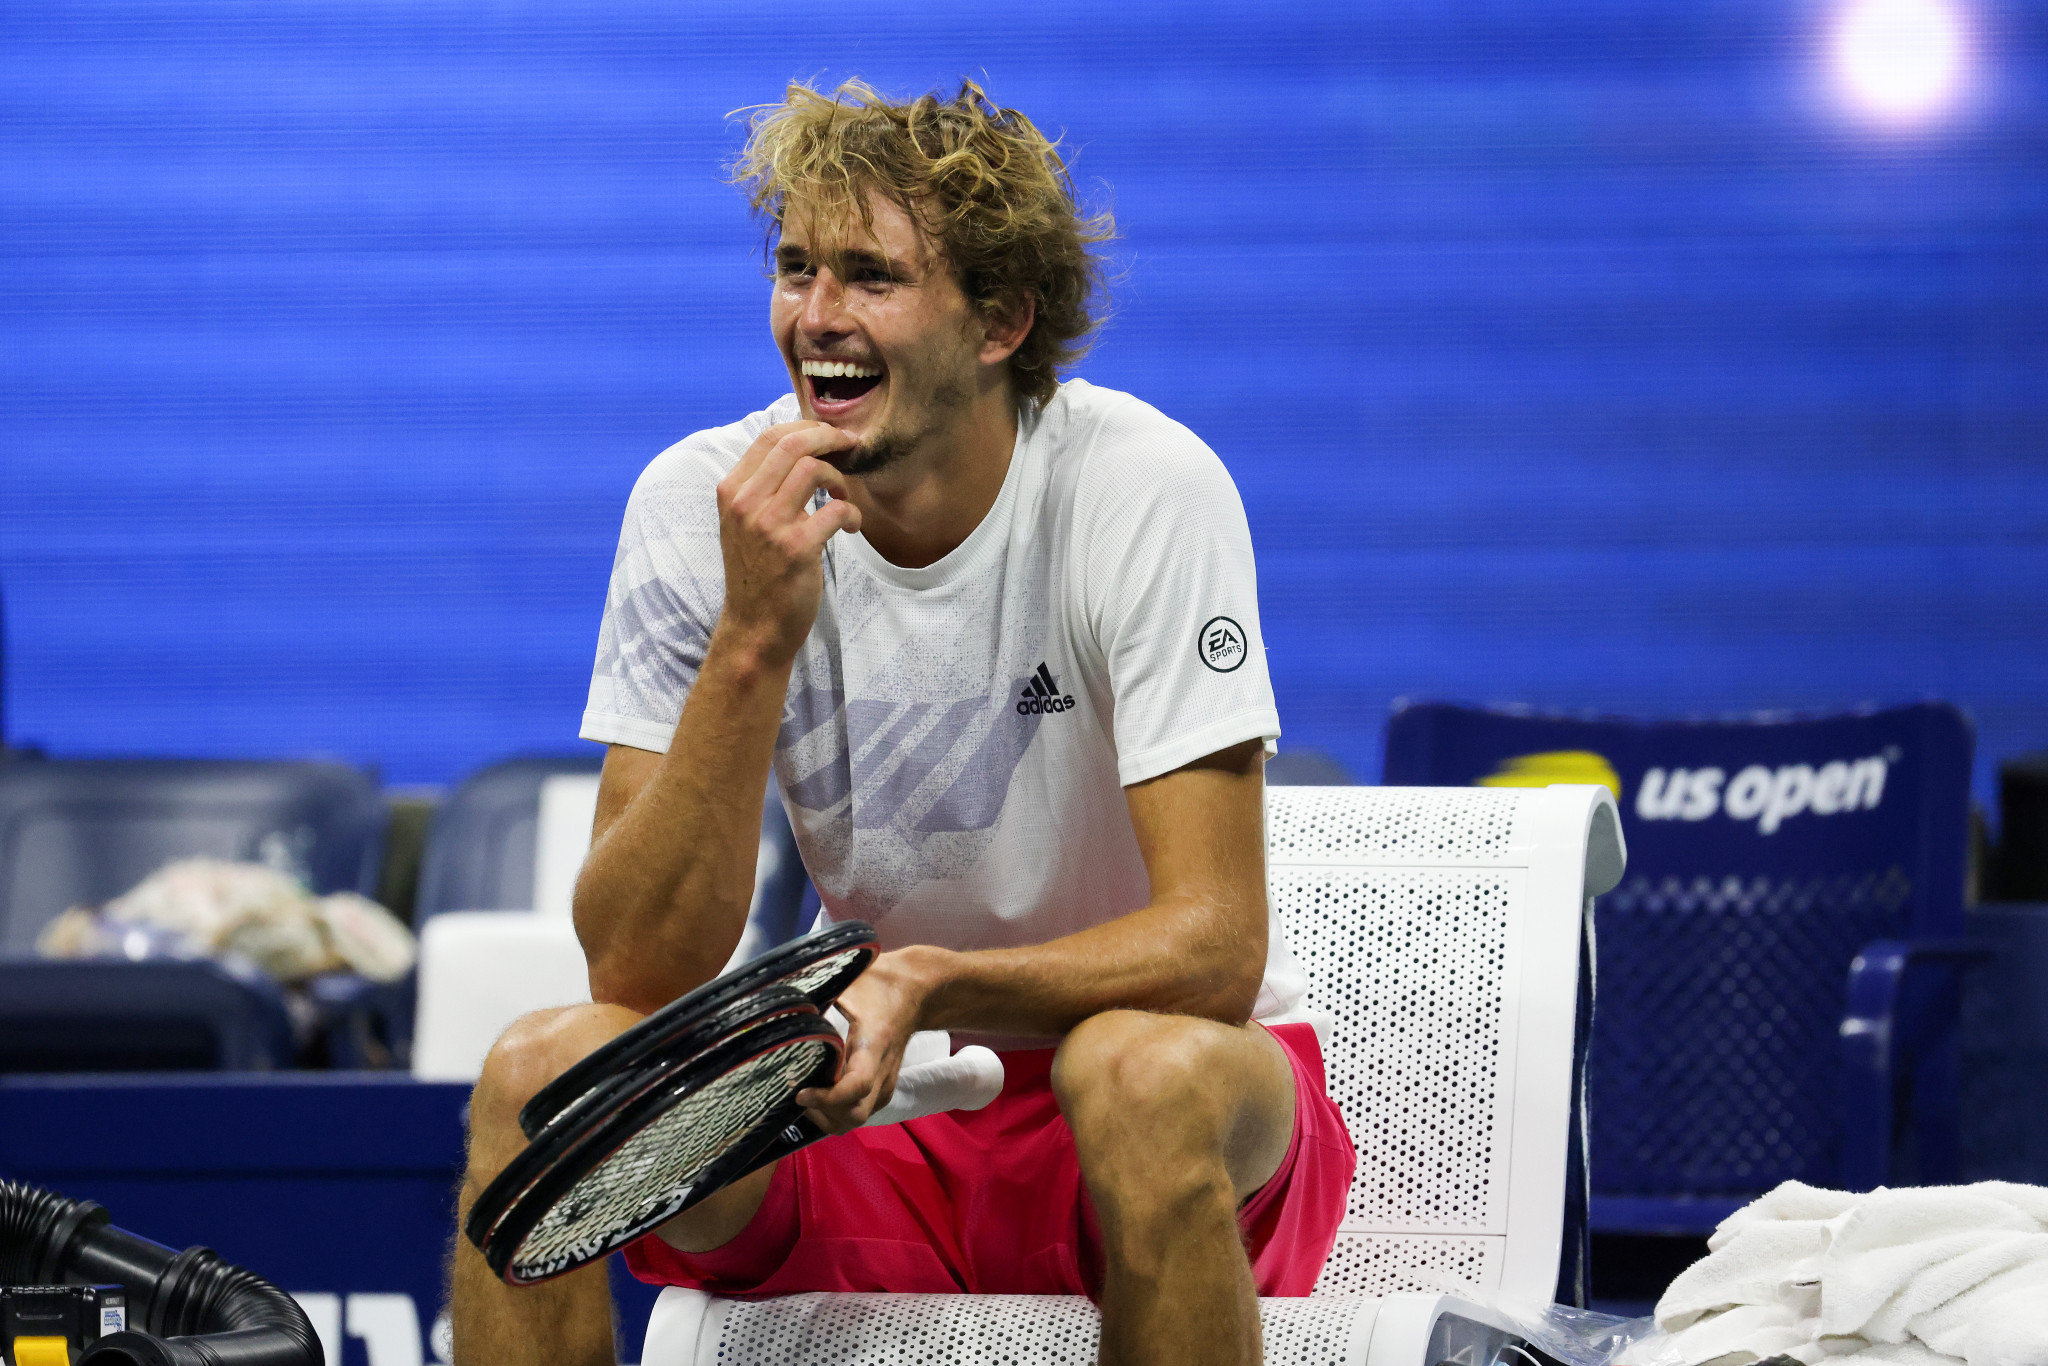 Alex Zverev looks on in amazement after overturning a two set deficit to beat Pablo Carreno Busta and reach the men's singles final ©Getty Images